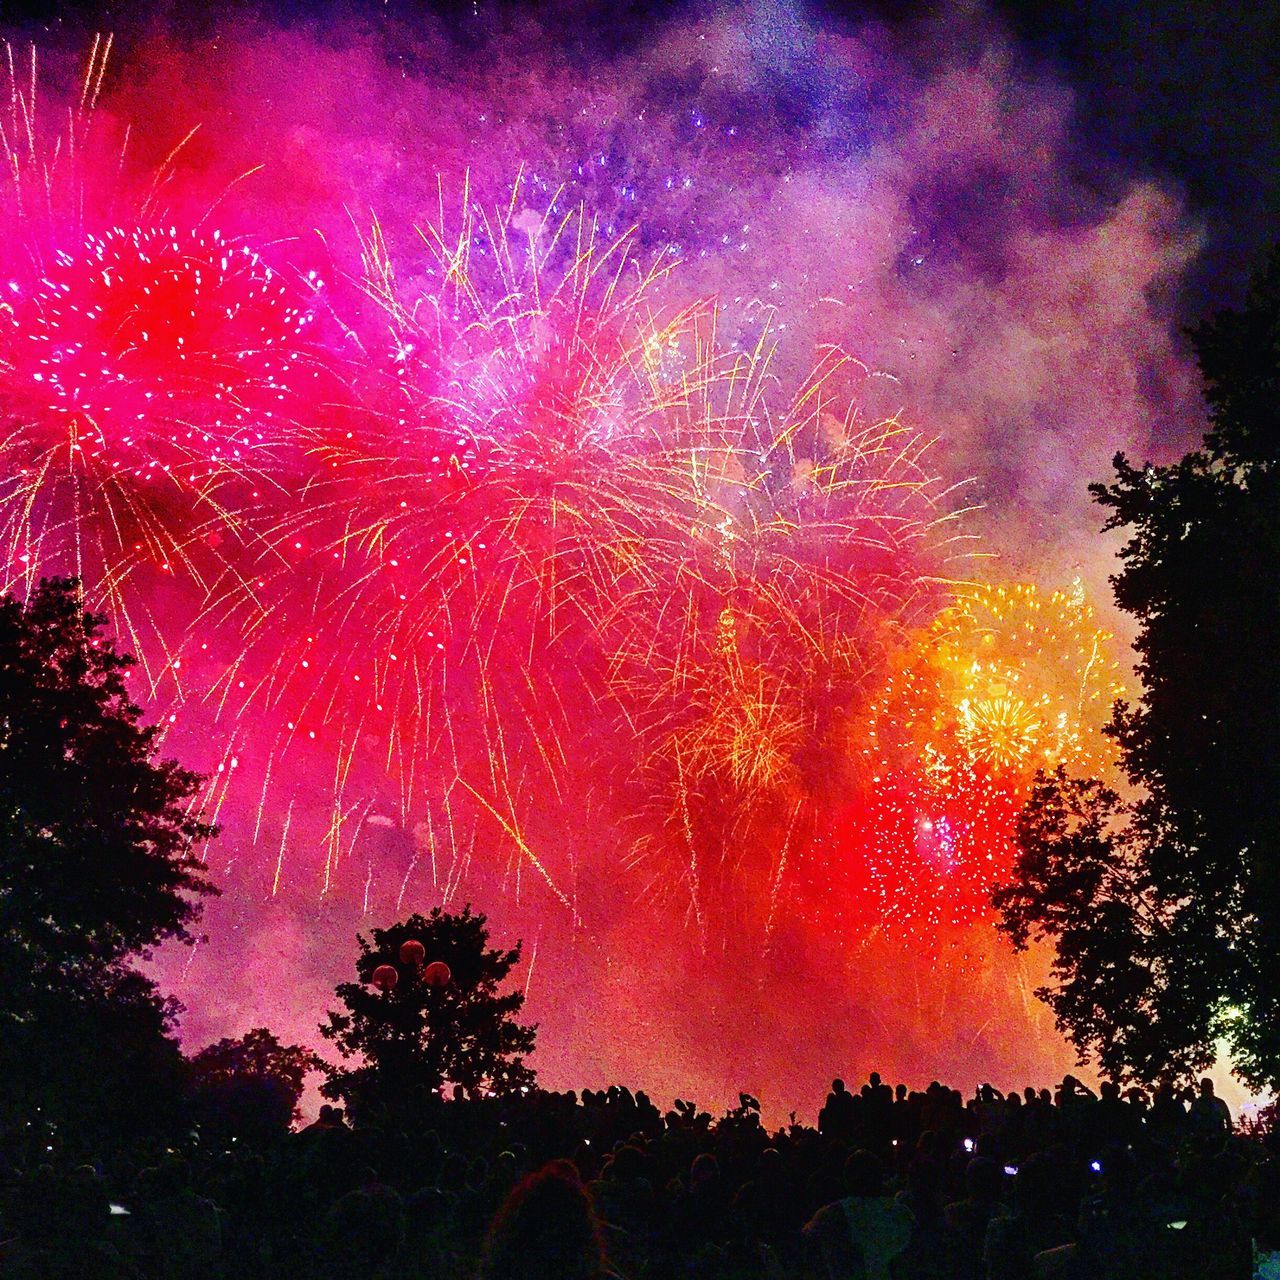 night, celebration, low angle view, firework display, exploding, no people, multi colored, tree, sky, outdoors, growth, beauty in nature, illuminated, nature